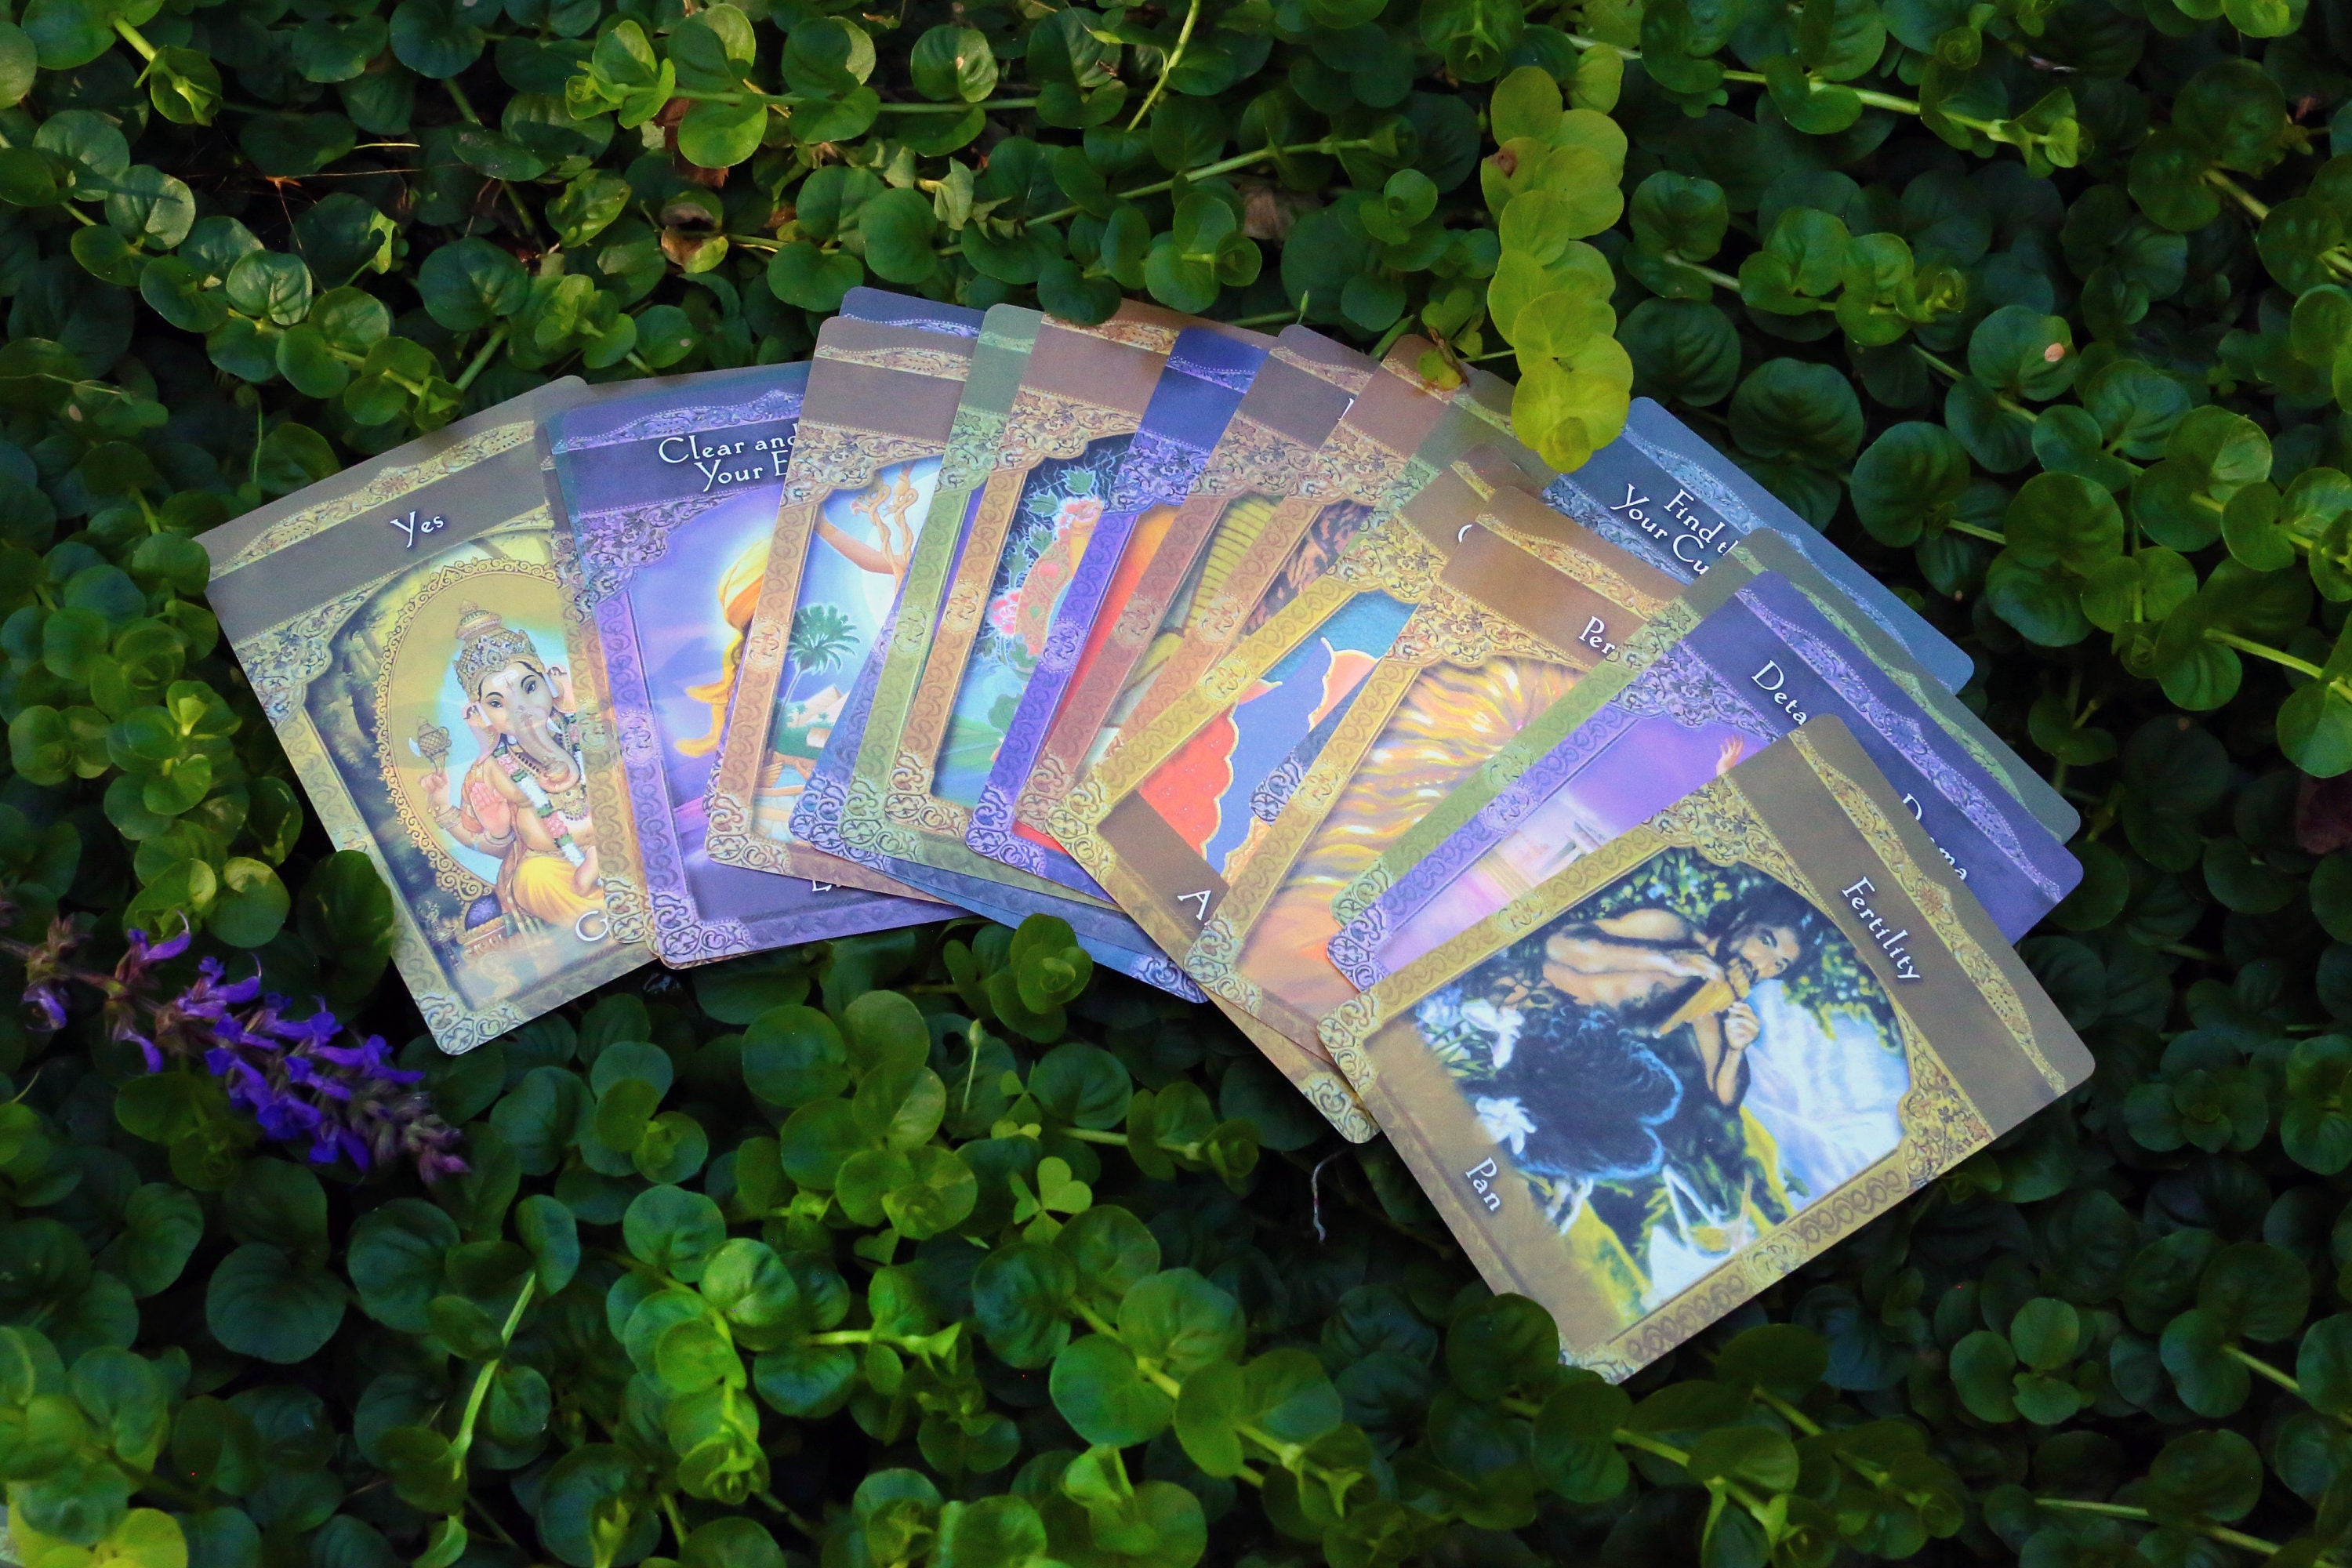 Ascended Masters, Illustrated by Doreen Virtue, 44 Oracle Card Divination Deck